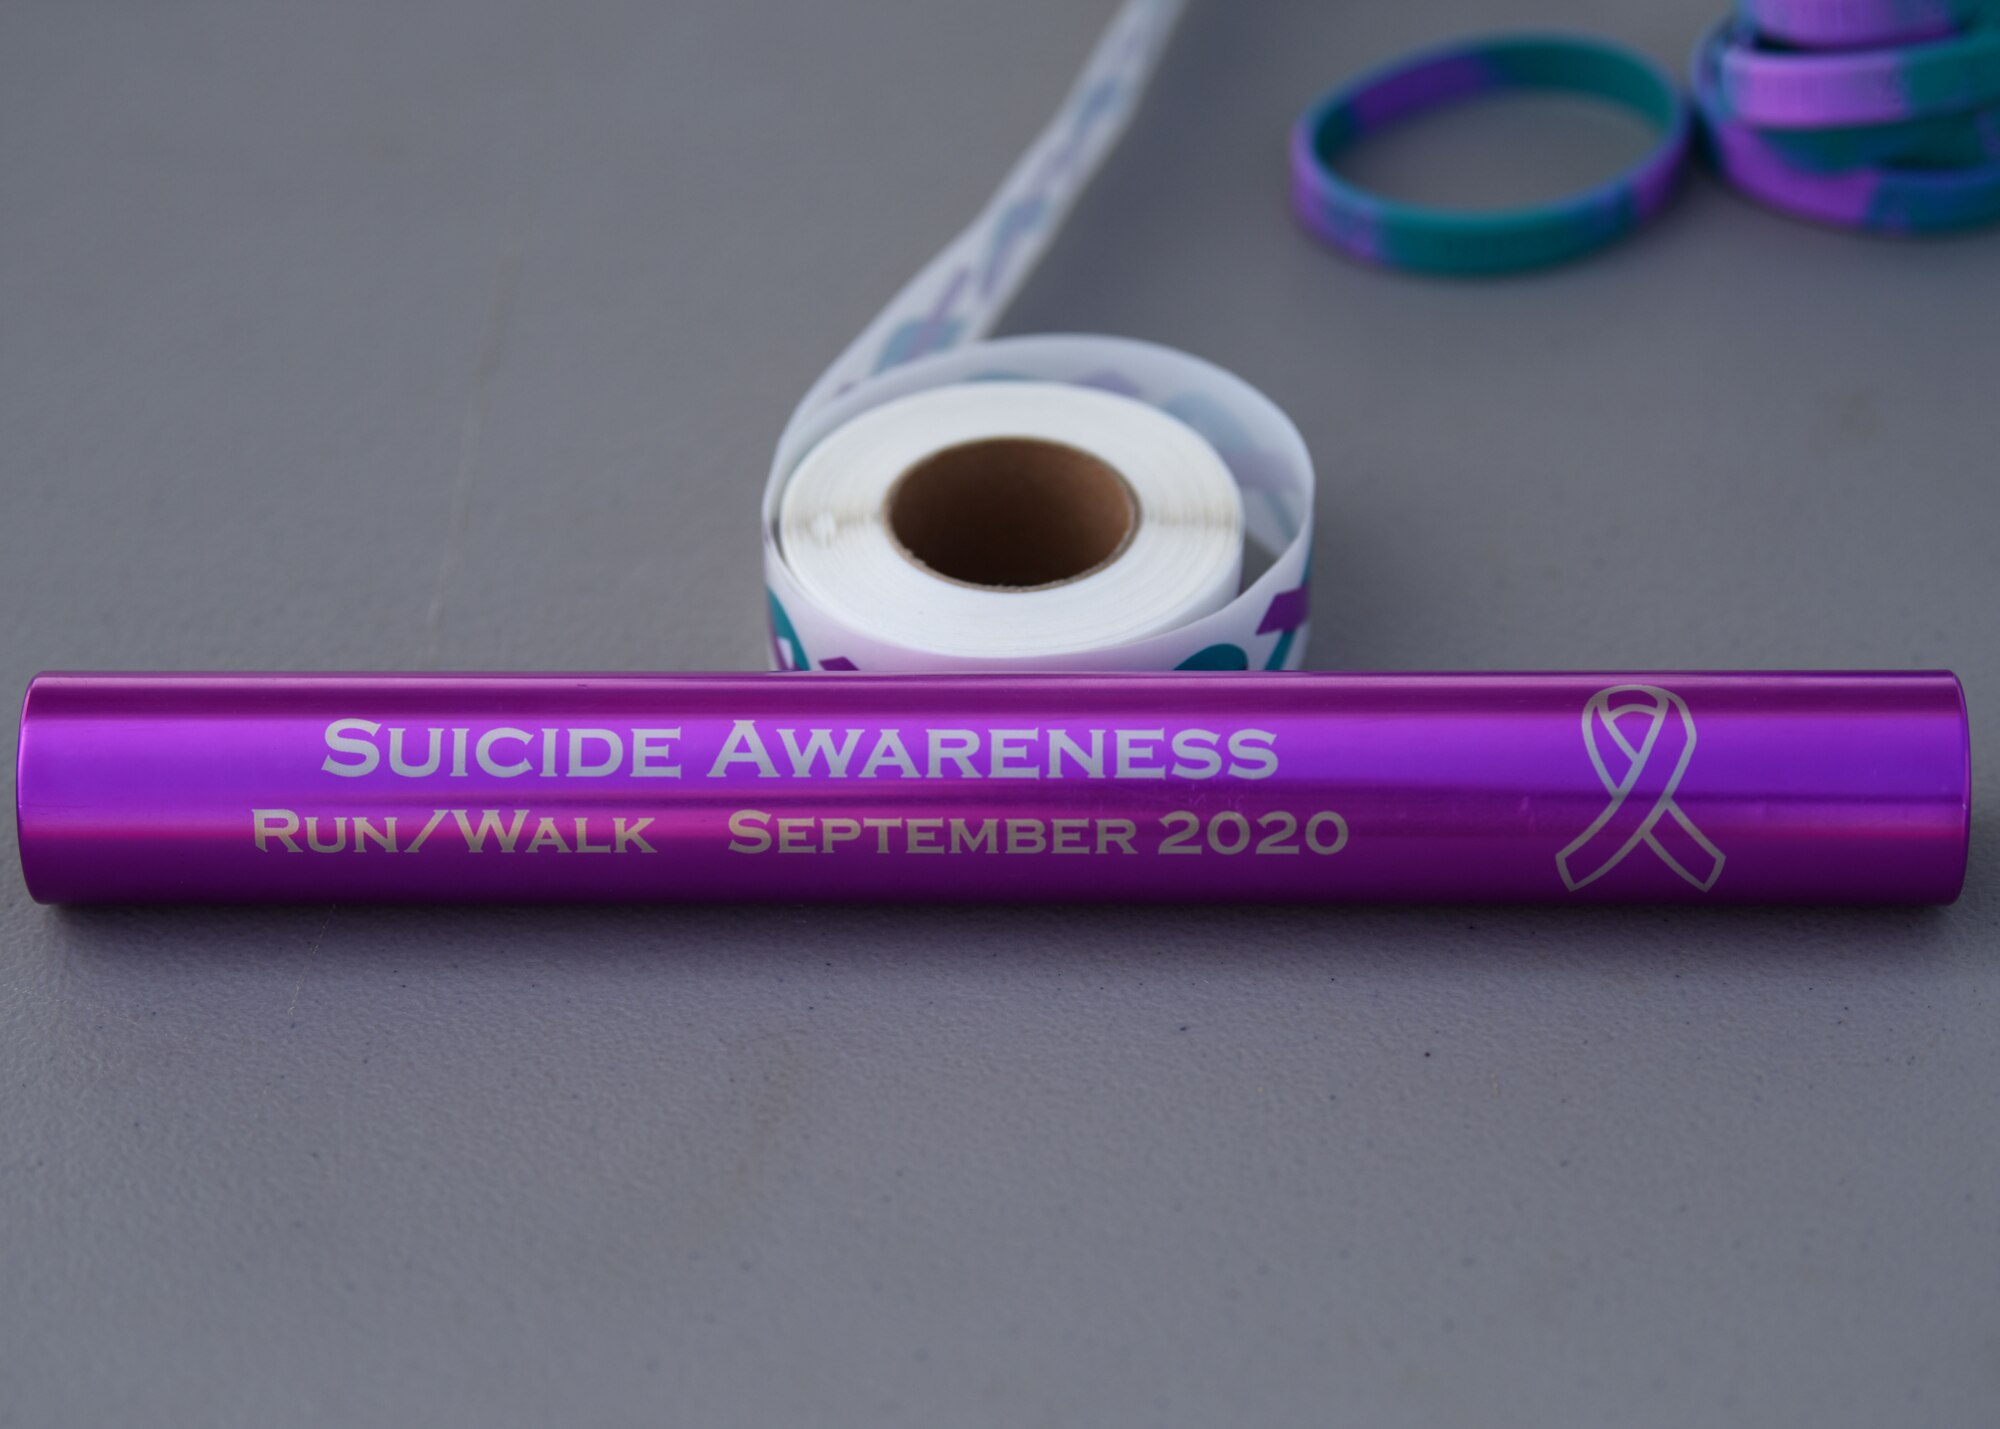 A baton is displayed on the sign-up table at the Suicide Awareness 24 Hour Run/Walkathons at the Mathis Field Track on Goodfellow Air Force Base, Texas, Sept. 18, 2020. The baton was carried by participants throughout the run/walk. (U.S. Air Force photo by Airman 1st Class Ethan Sherwood)